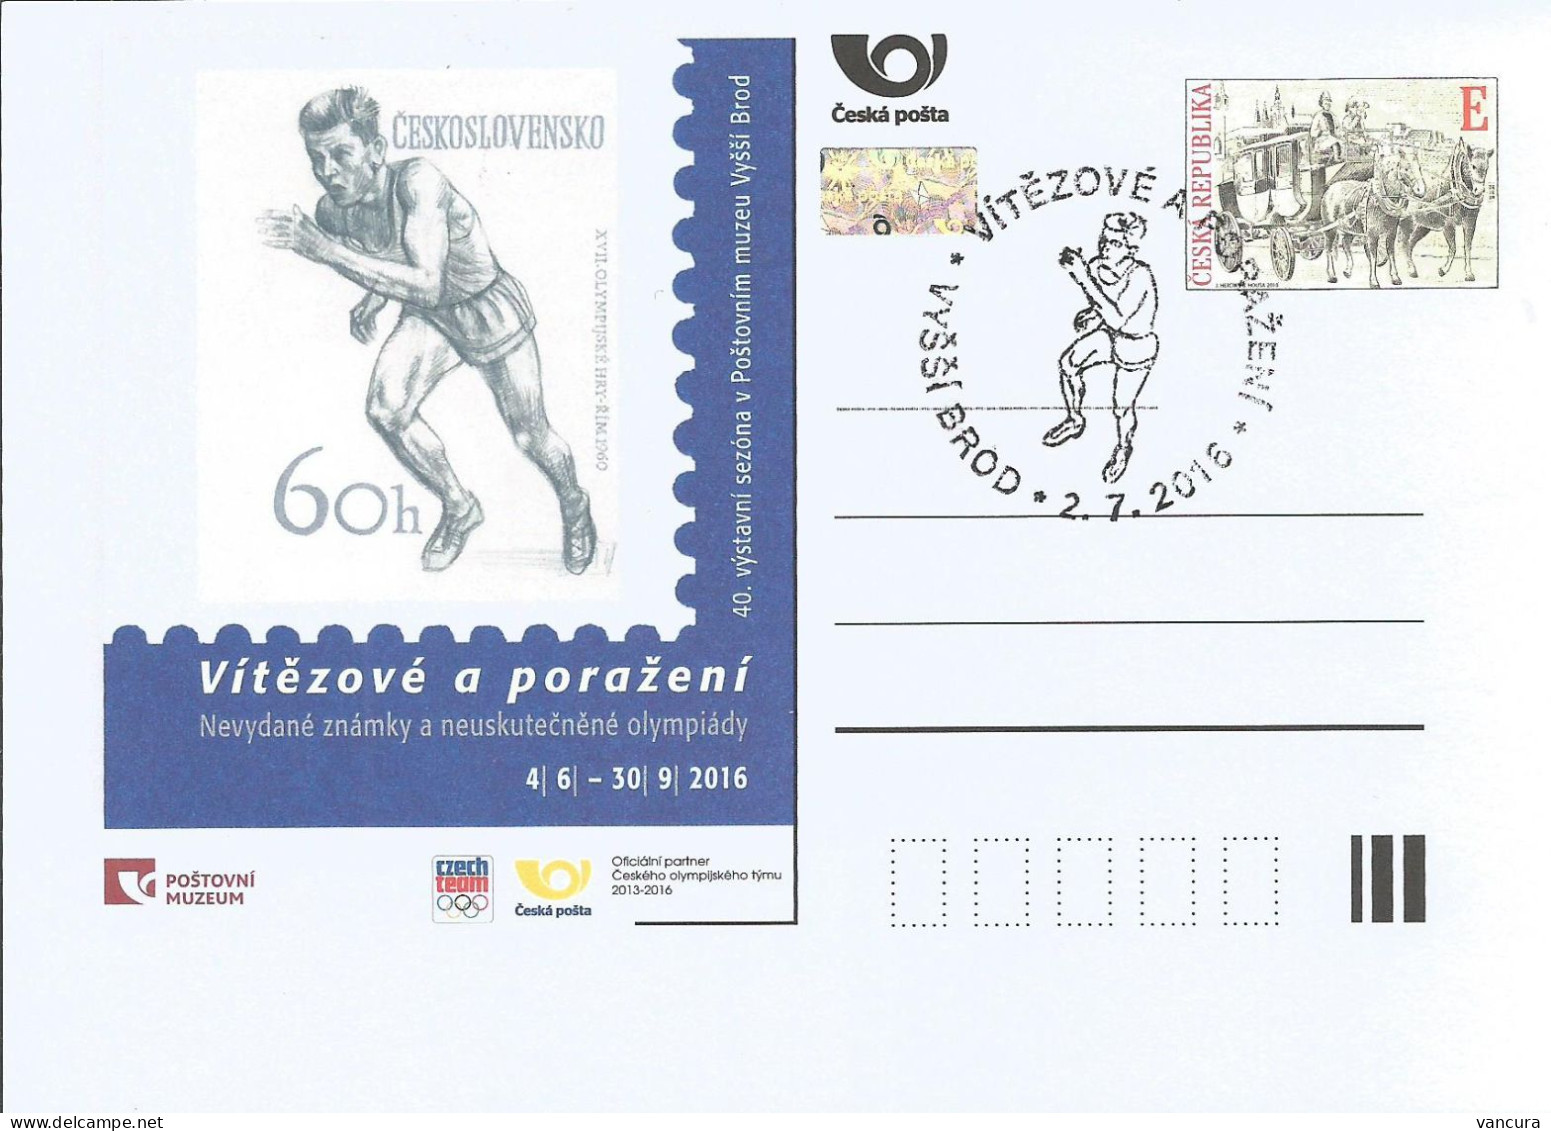 CDV PM 112 Czech Republic Exhibition In Post Museum In Vyssi Brod/Hohenfurth - Unissued Designs Of Olympic Stamps 2016 - Zomer 1960: Rome